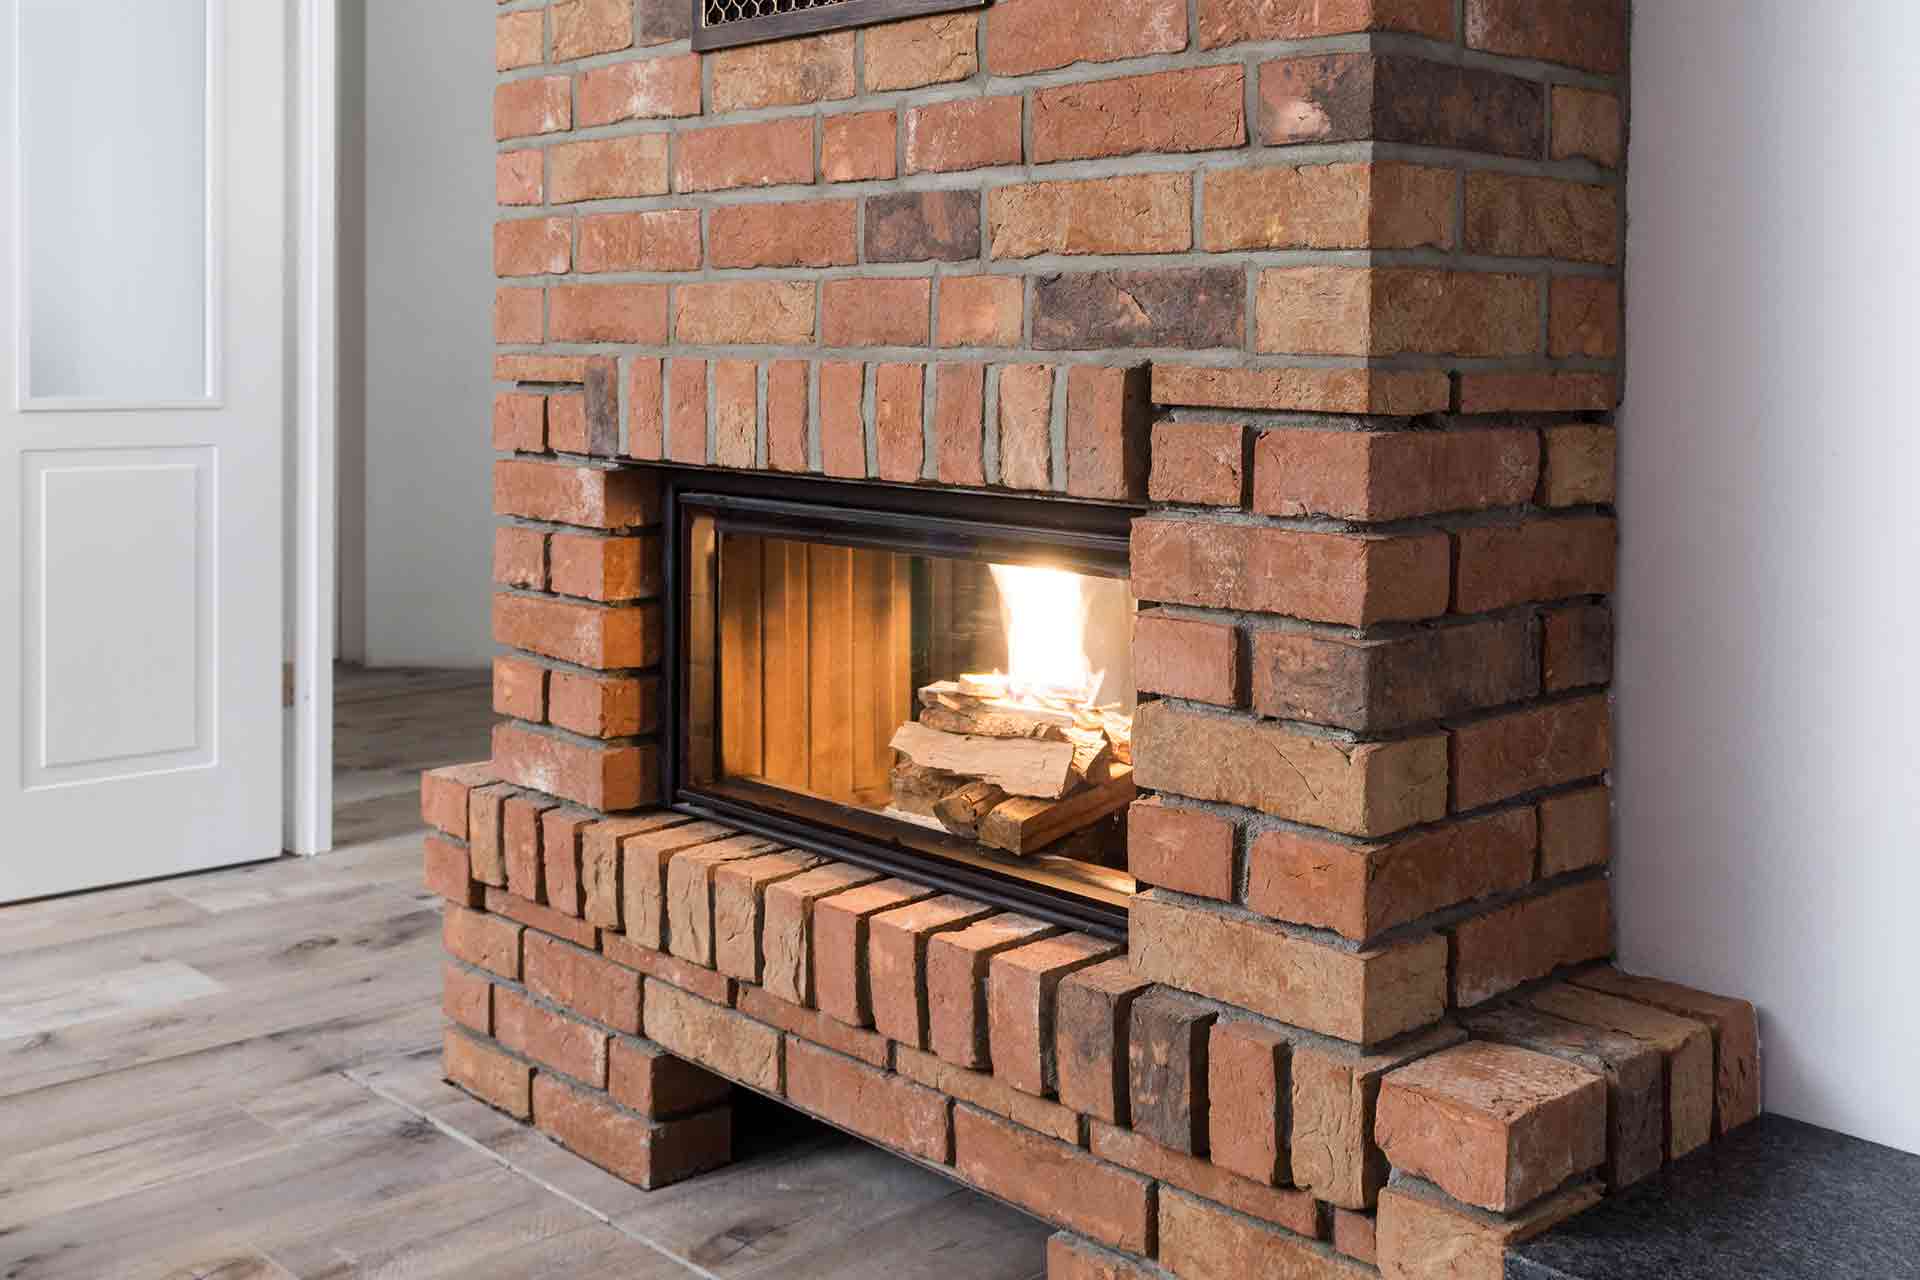 Cost To Build A Fireplace, How Much Does It Cost To Build Brick Fireplace